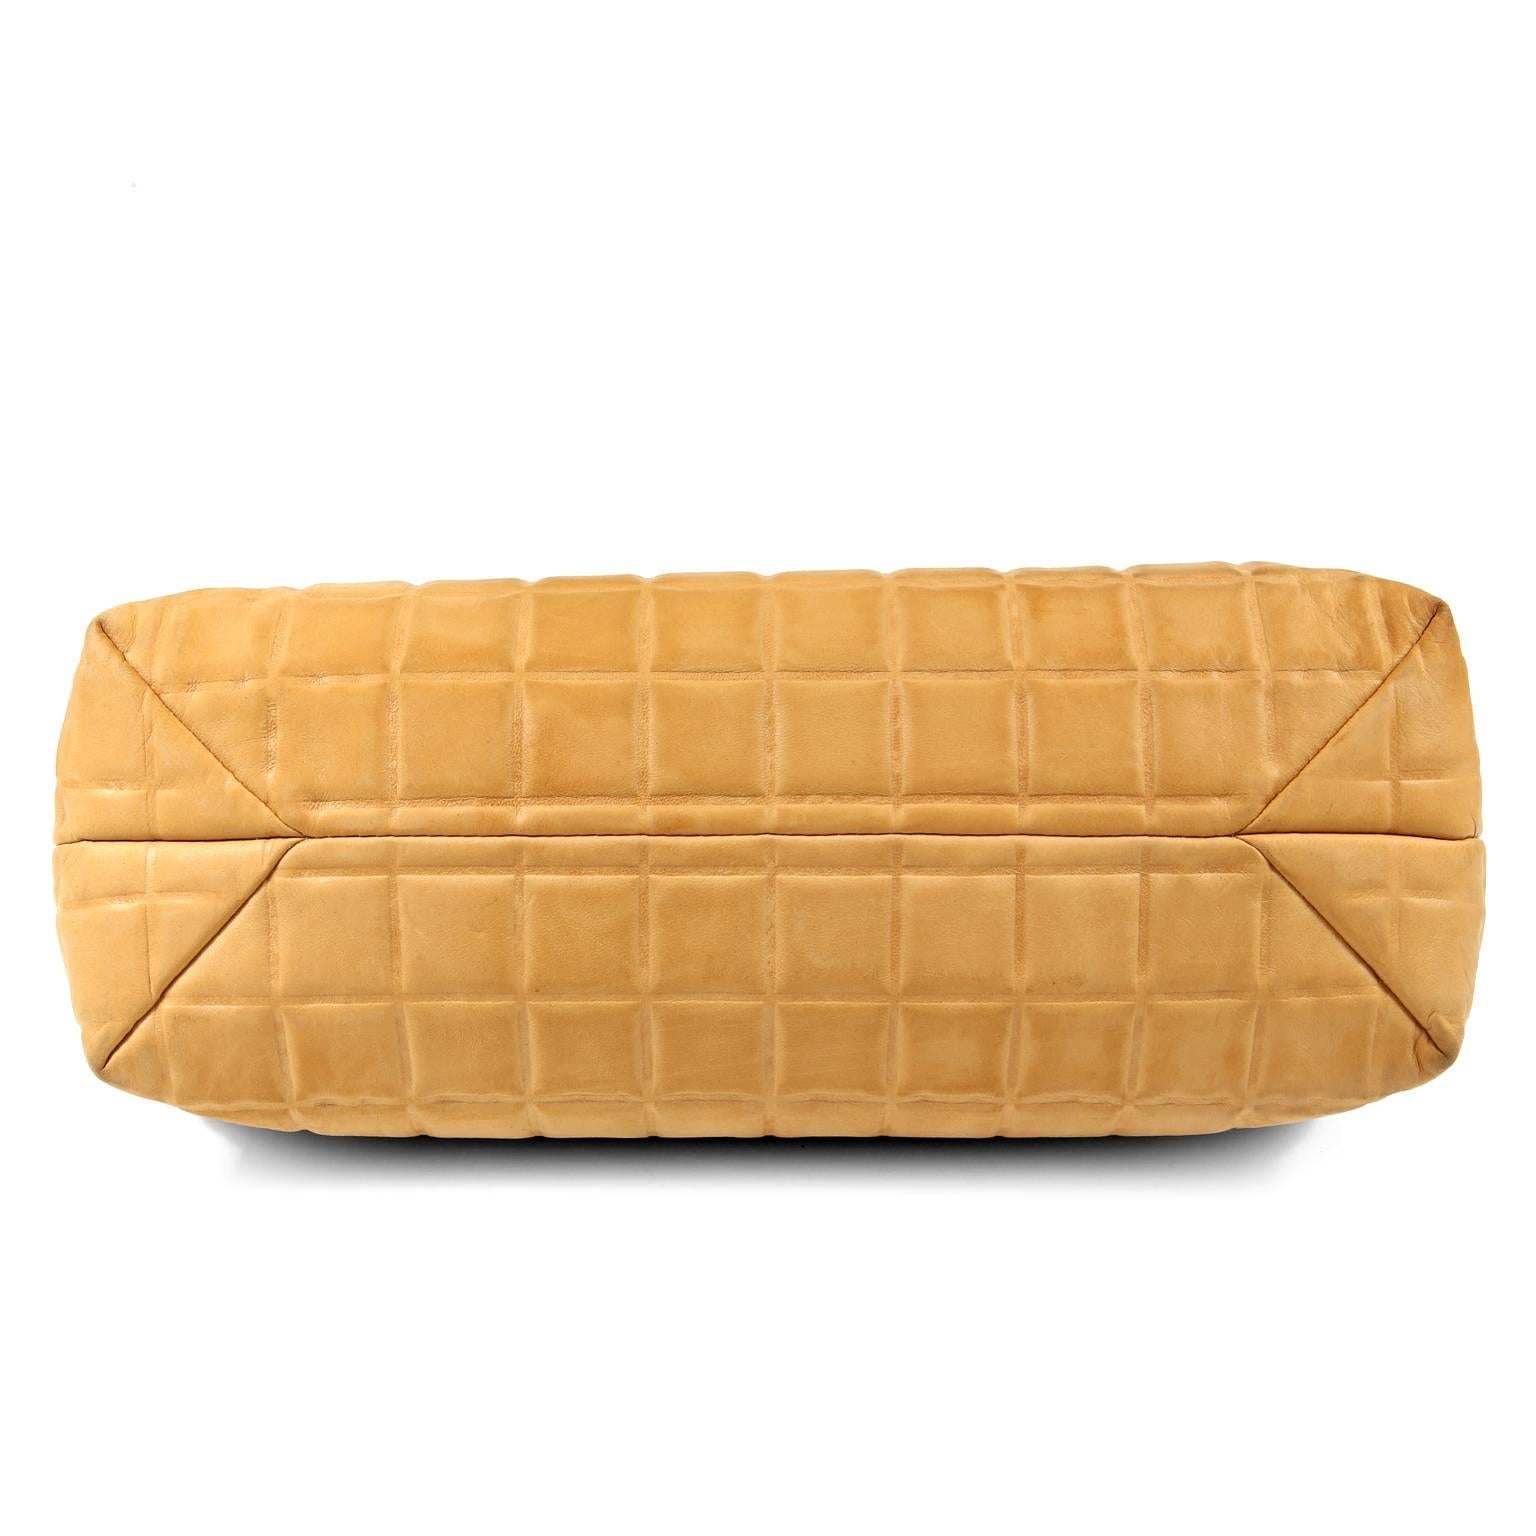 Women's Chanel Beige Square Quilted Frame Bag For Sale